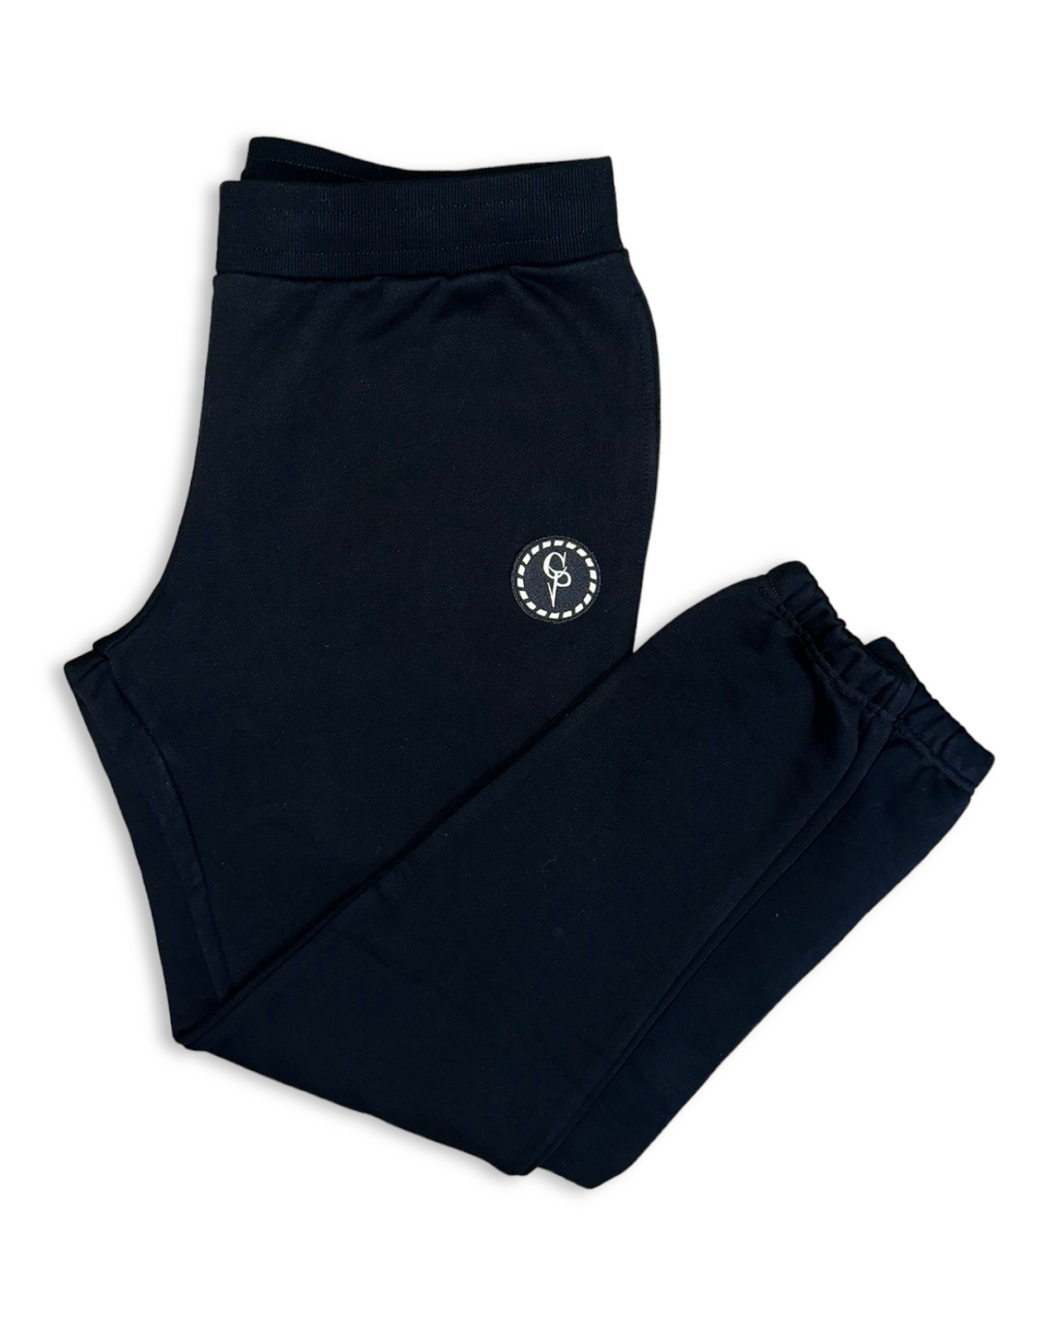 CP Joggers